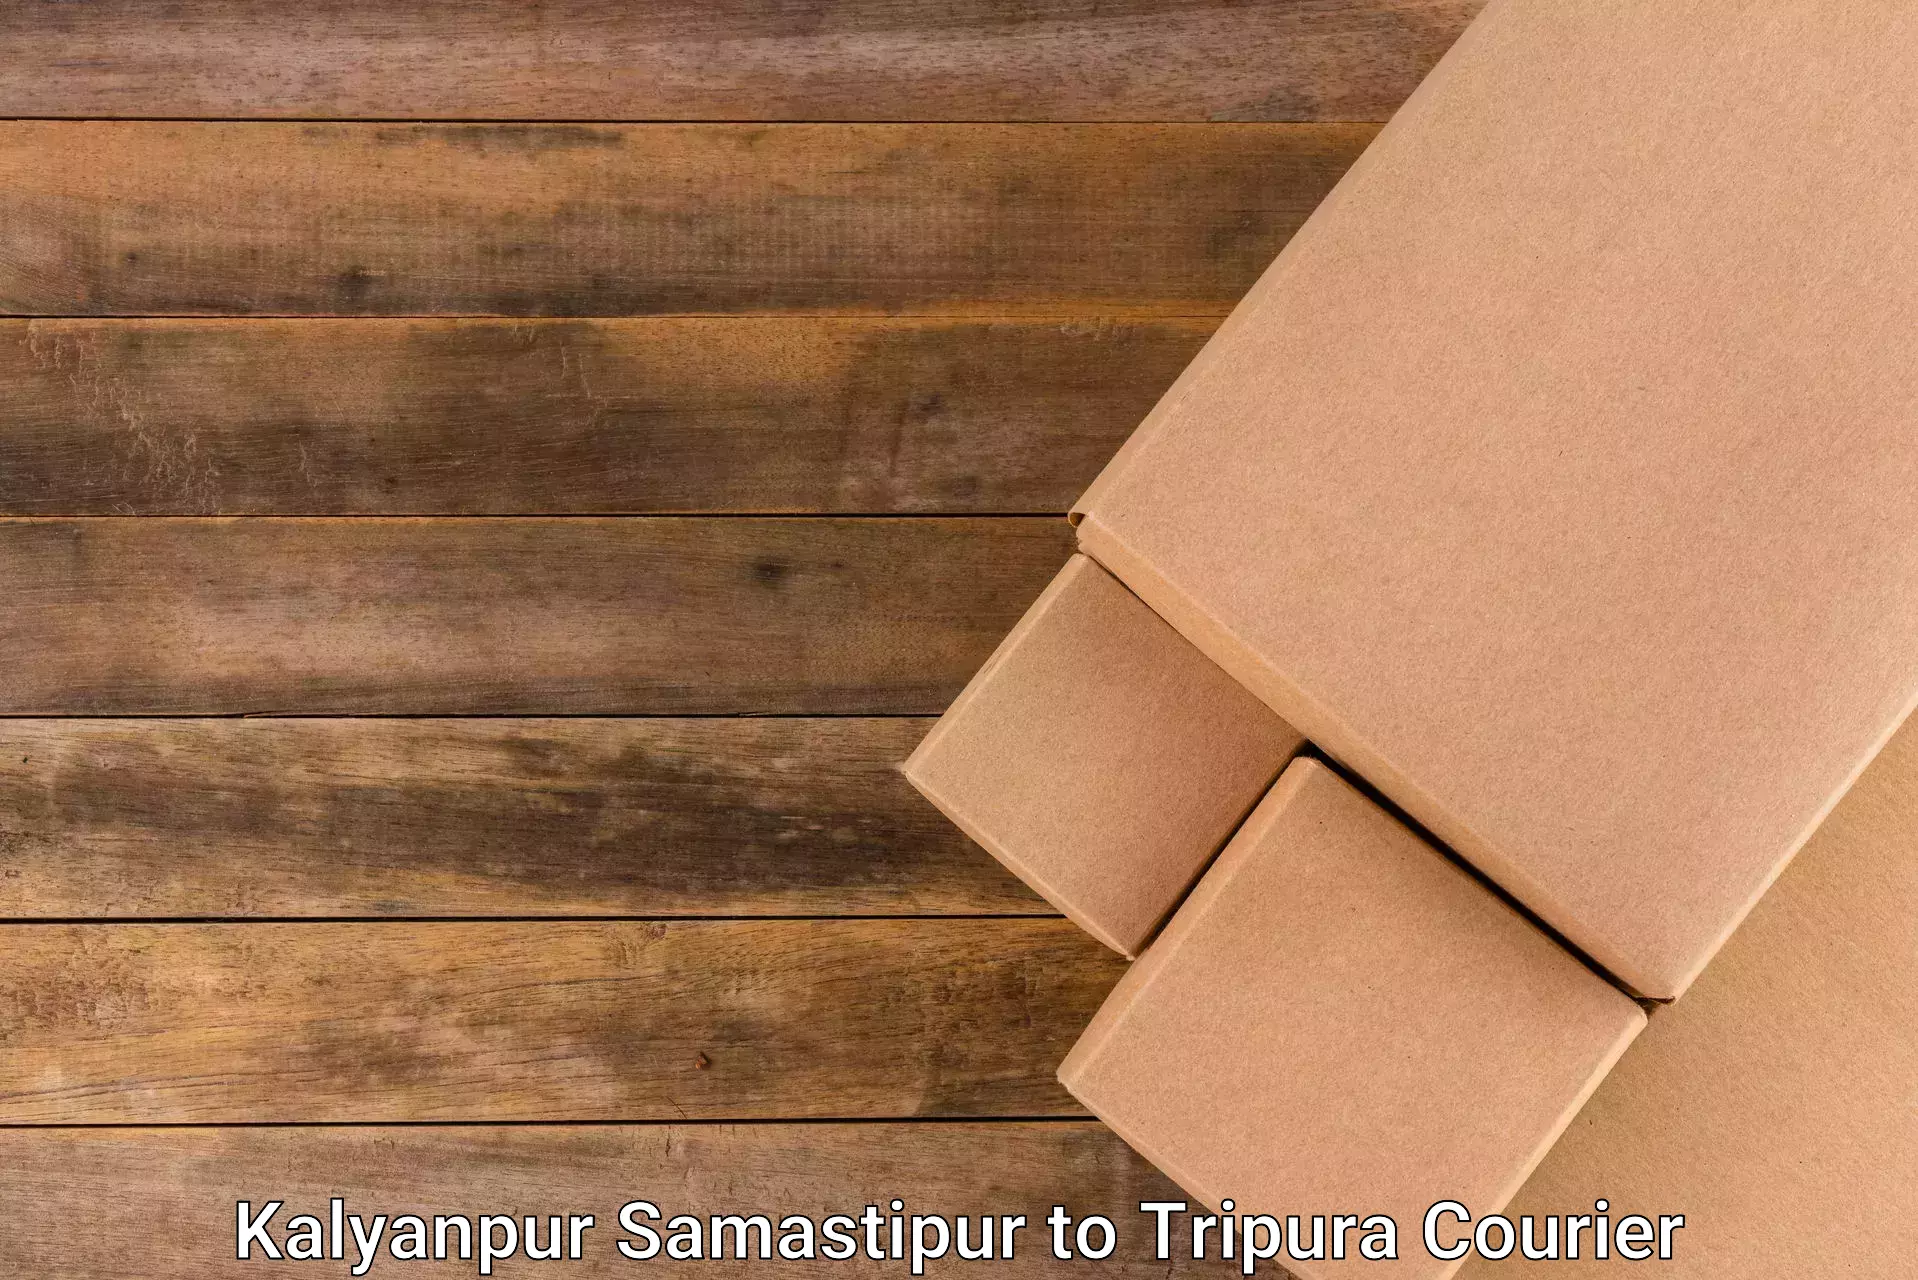 Express delivery network Kalyanpur Samastipur to Tripura